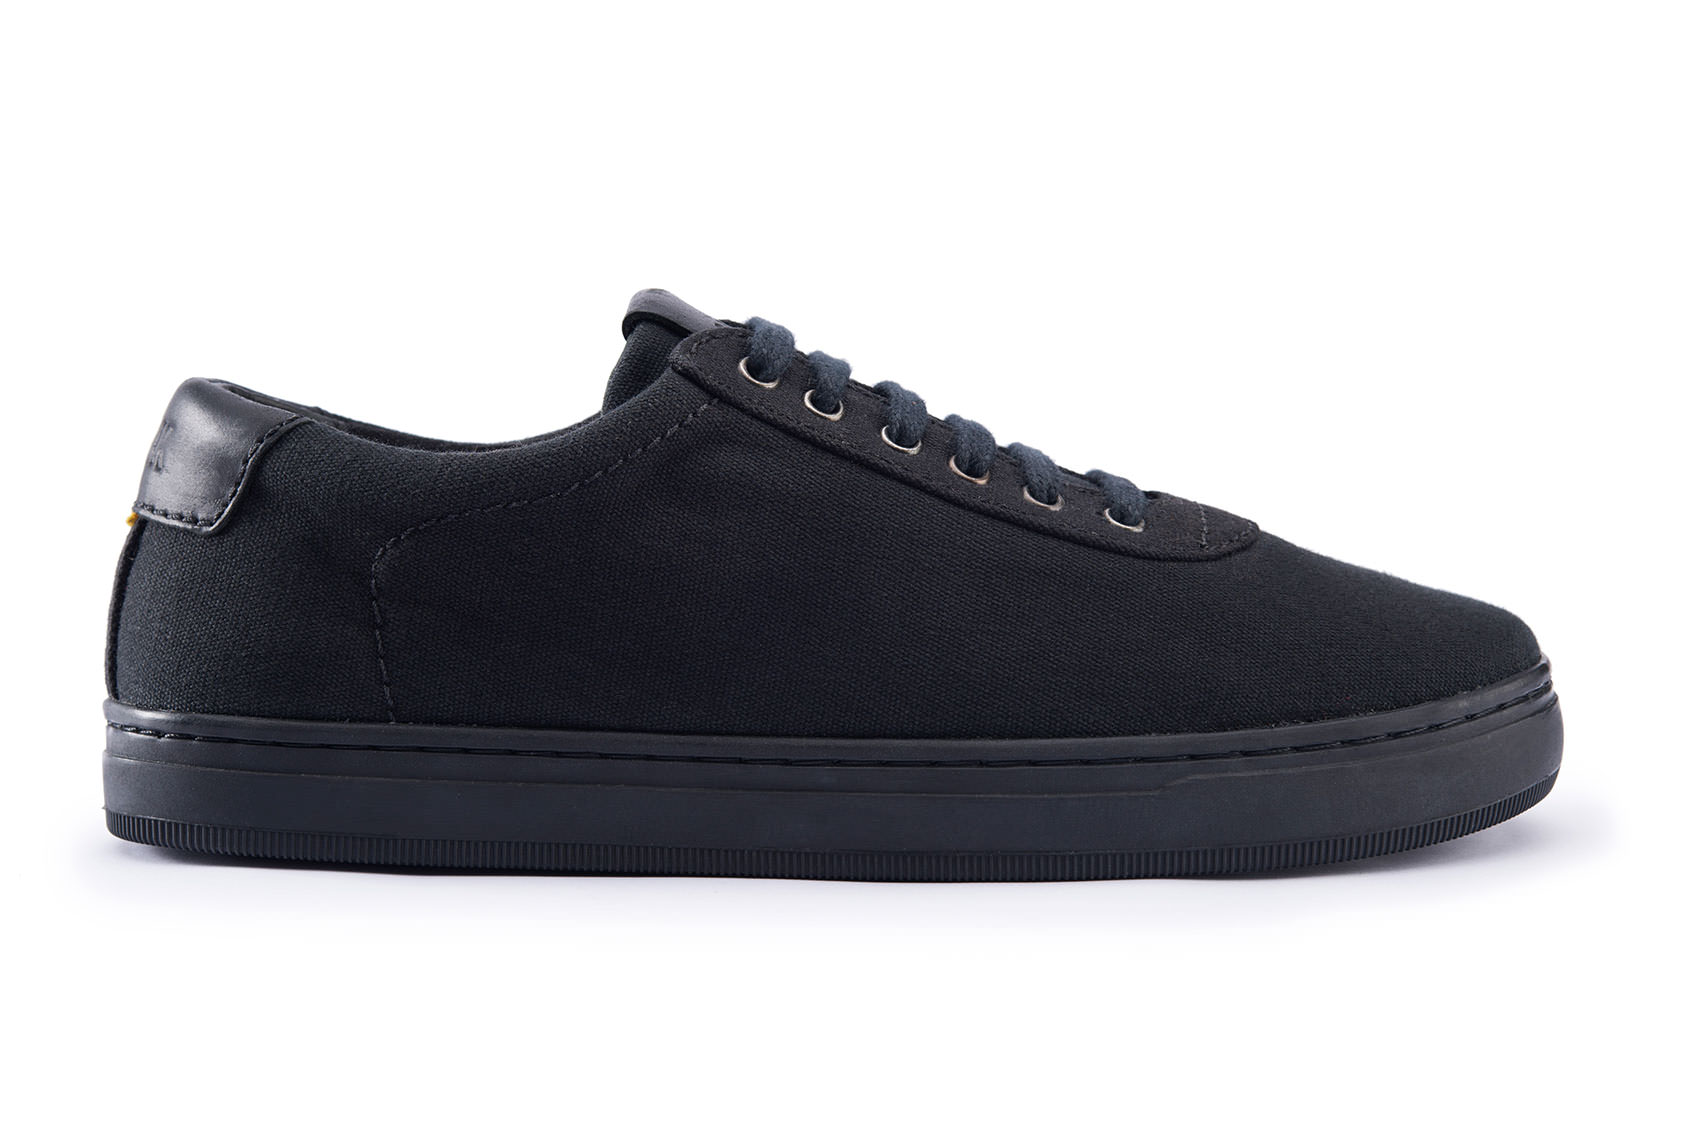 Co 13 all black sneakers syou side view